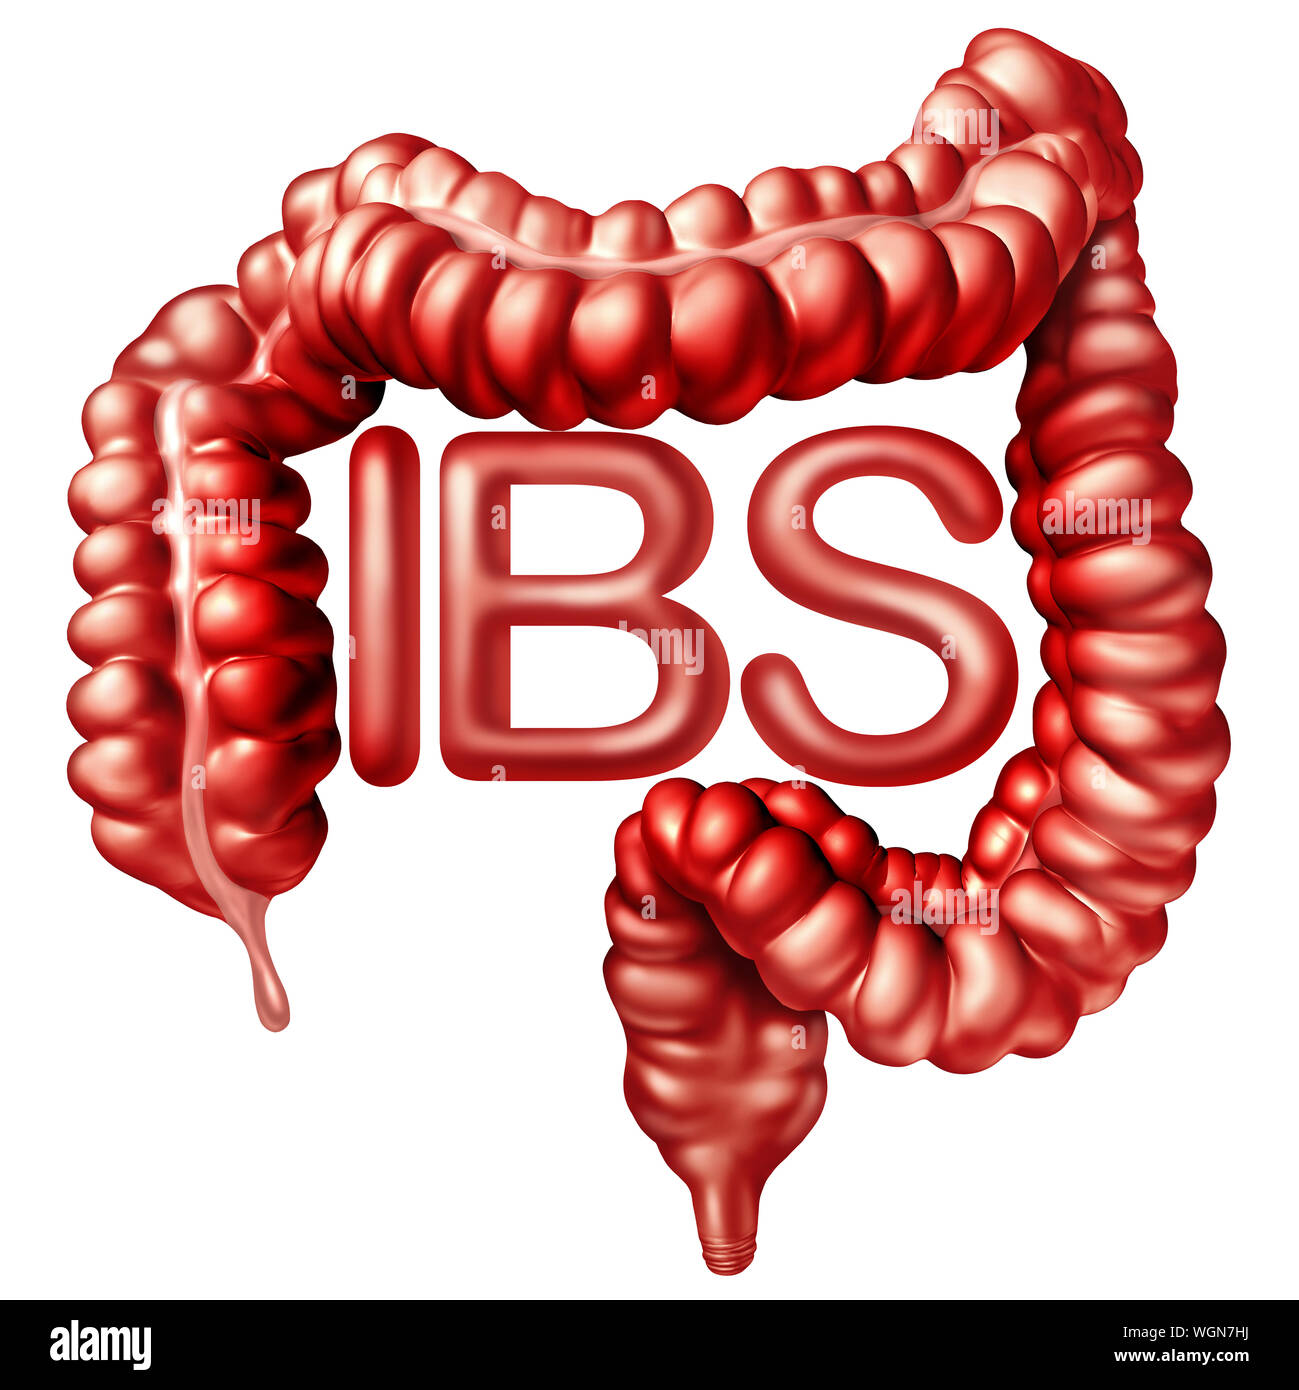 IBS medical concept as painful digestion or irritable bowel syndrome and intestine pain or Intestinal discomfort inflammation problem or constipation. Stock Photo